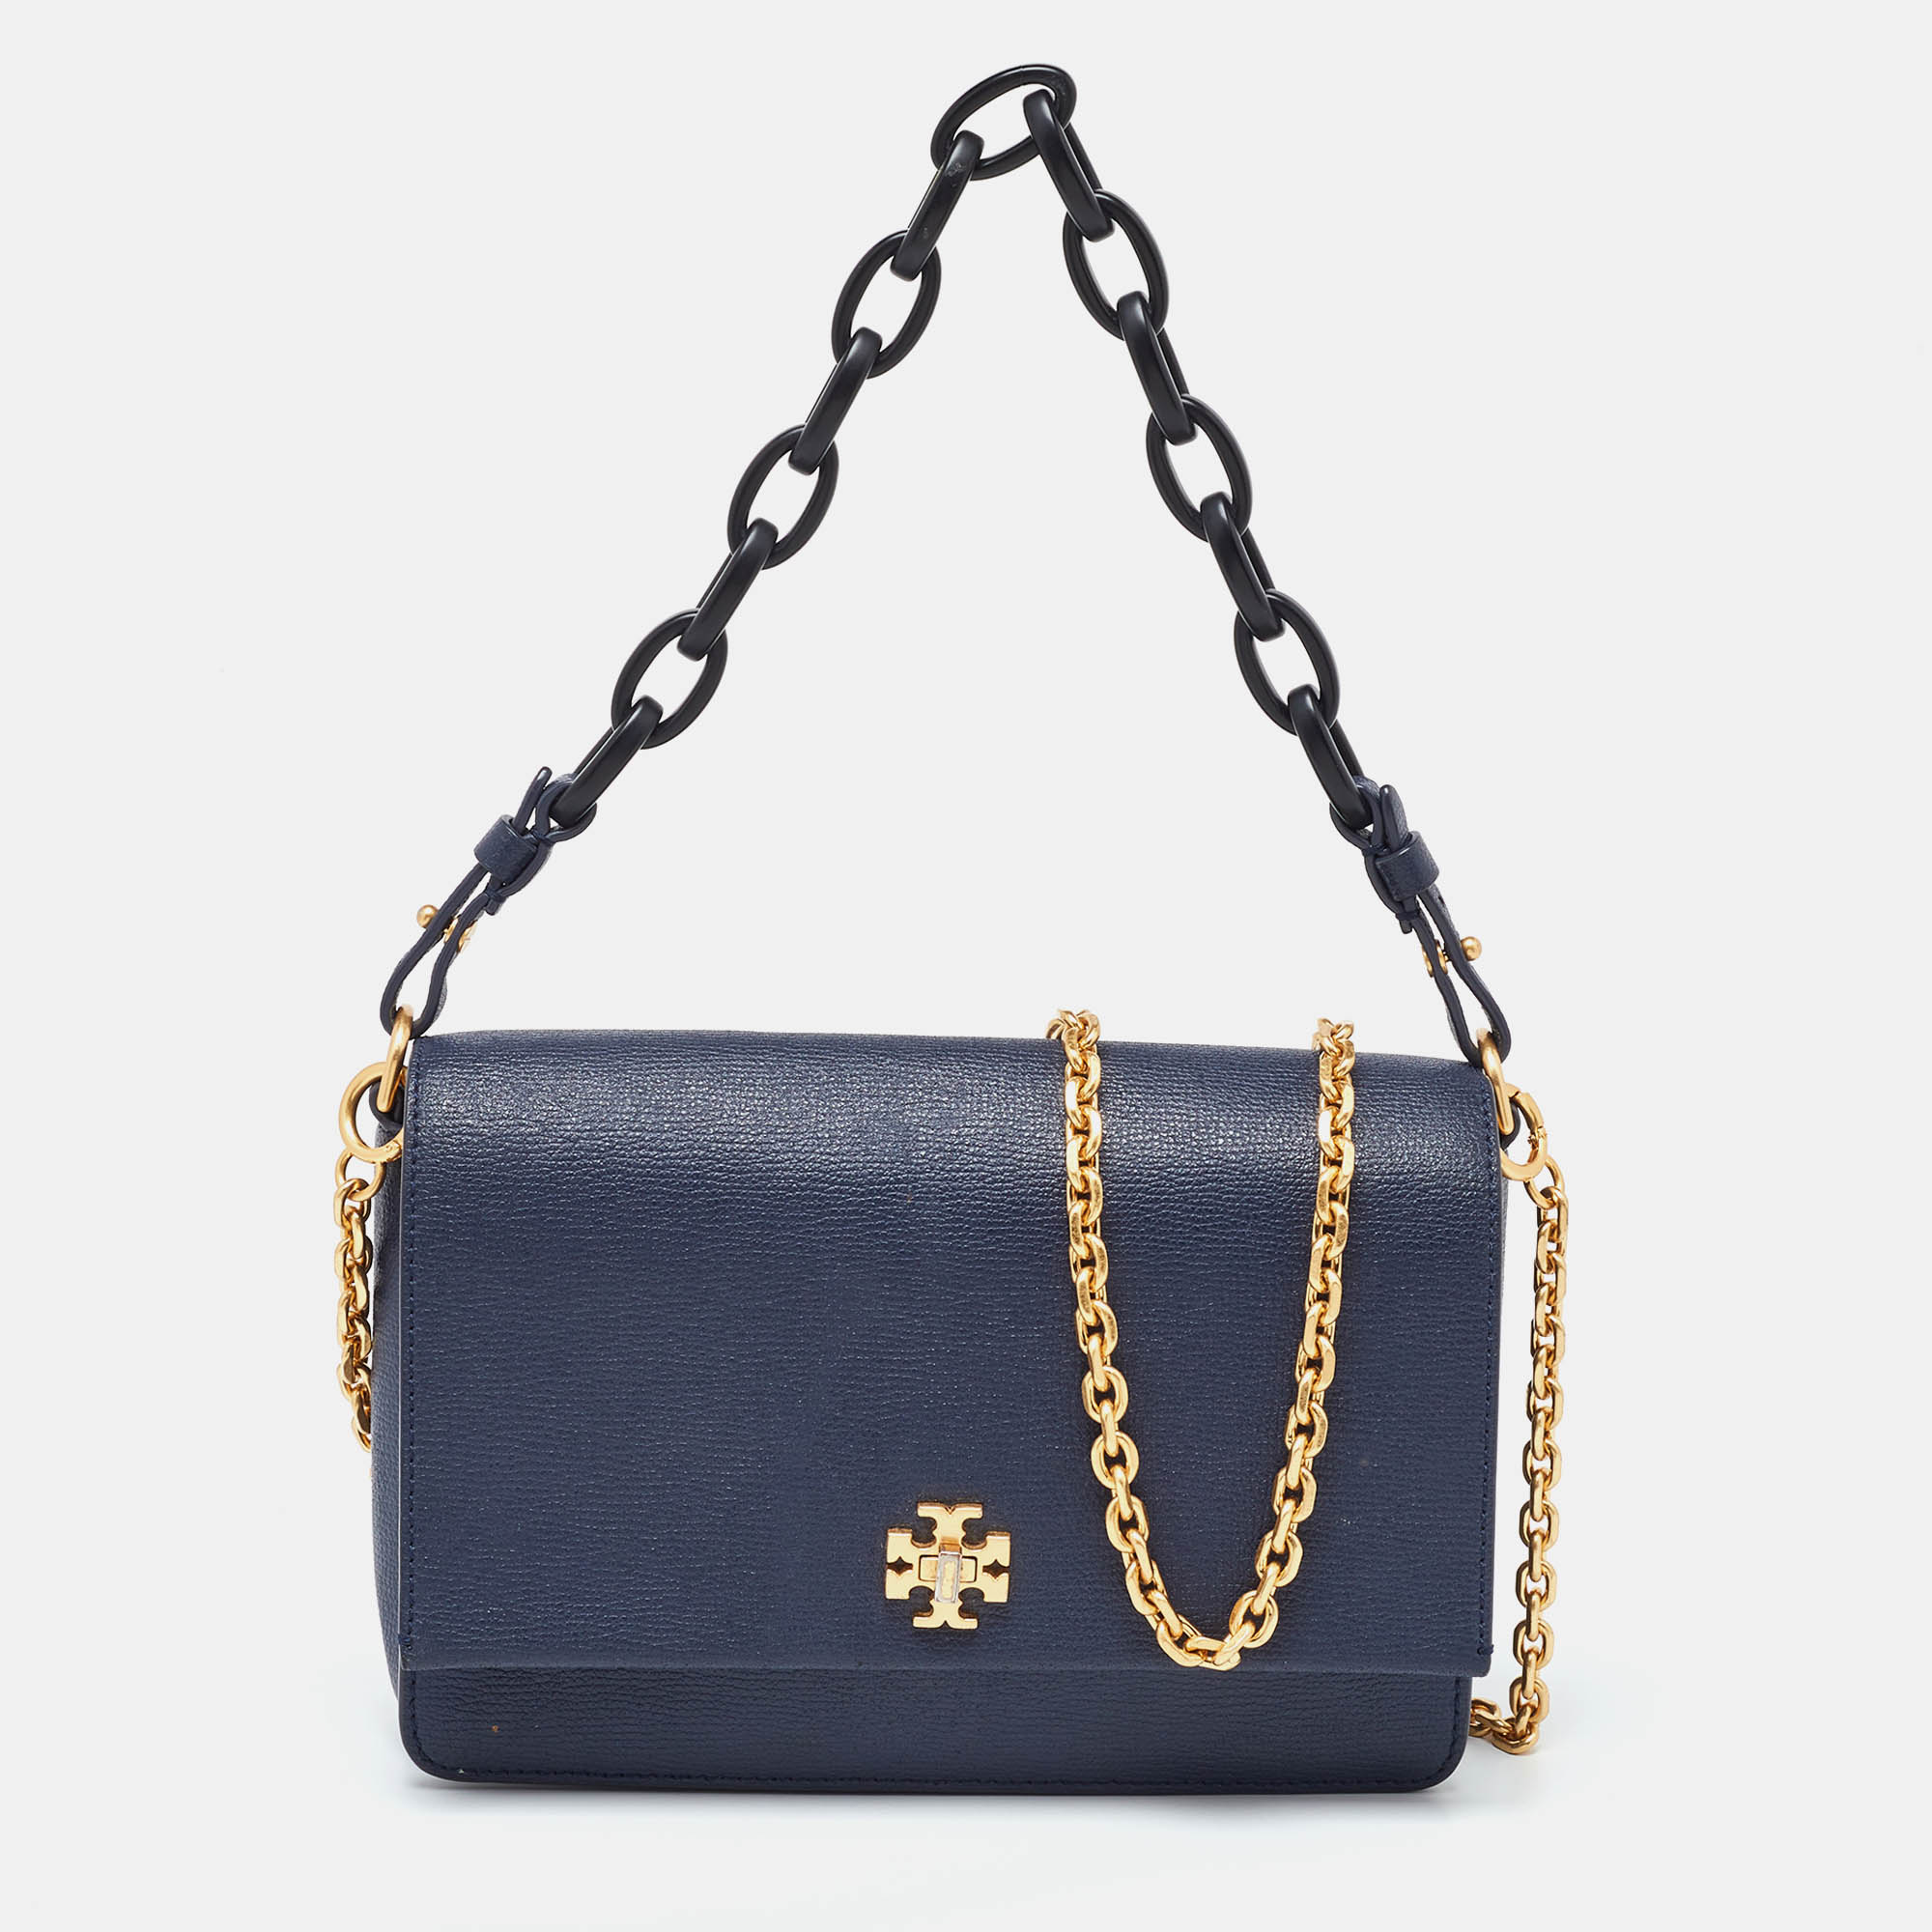 Pre-owned Tory Burch Navy Blue Leather Kira Double Strap Bag